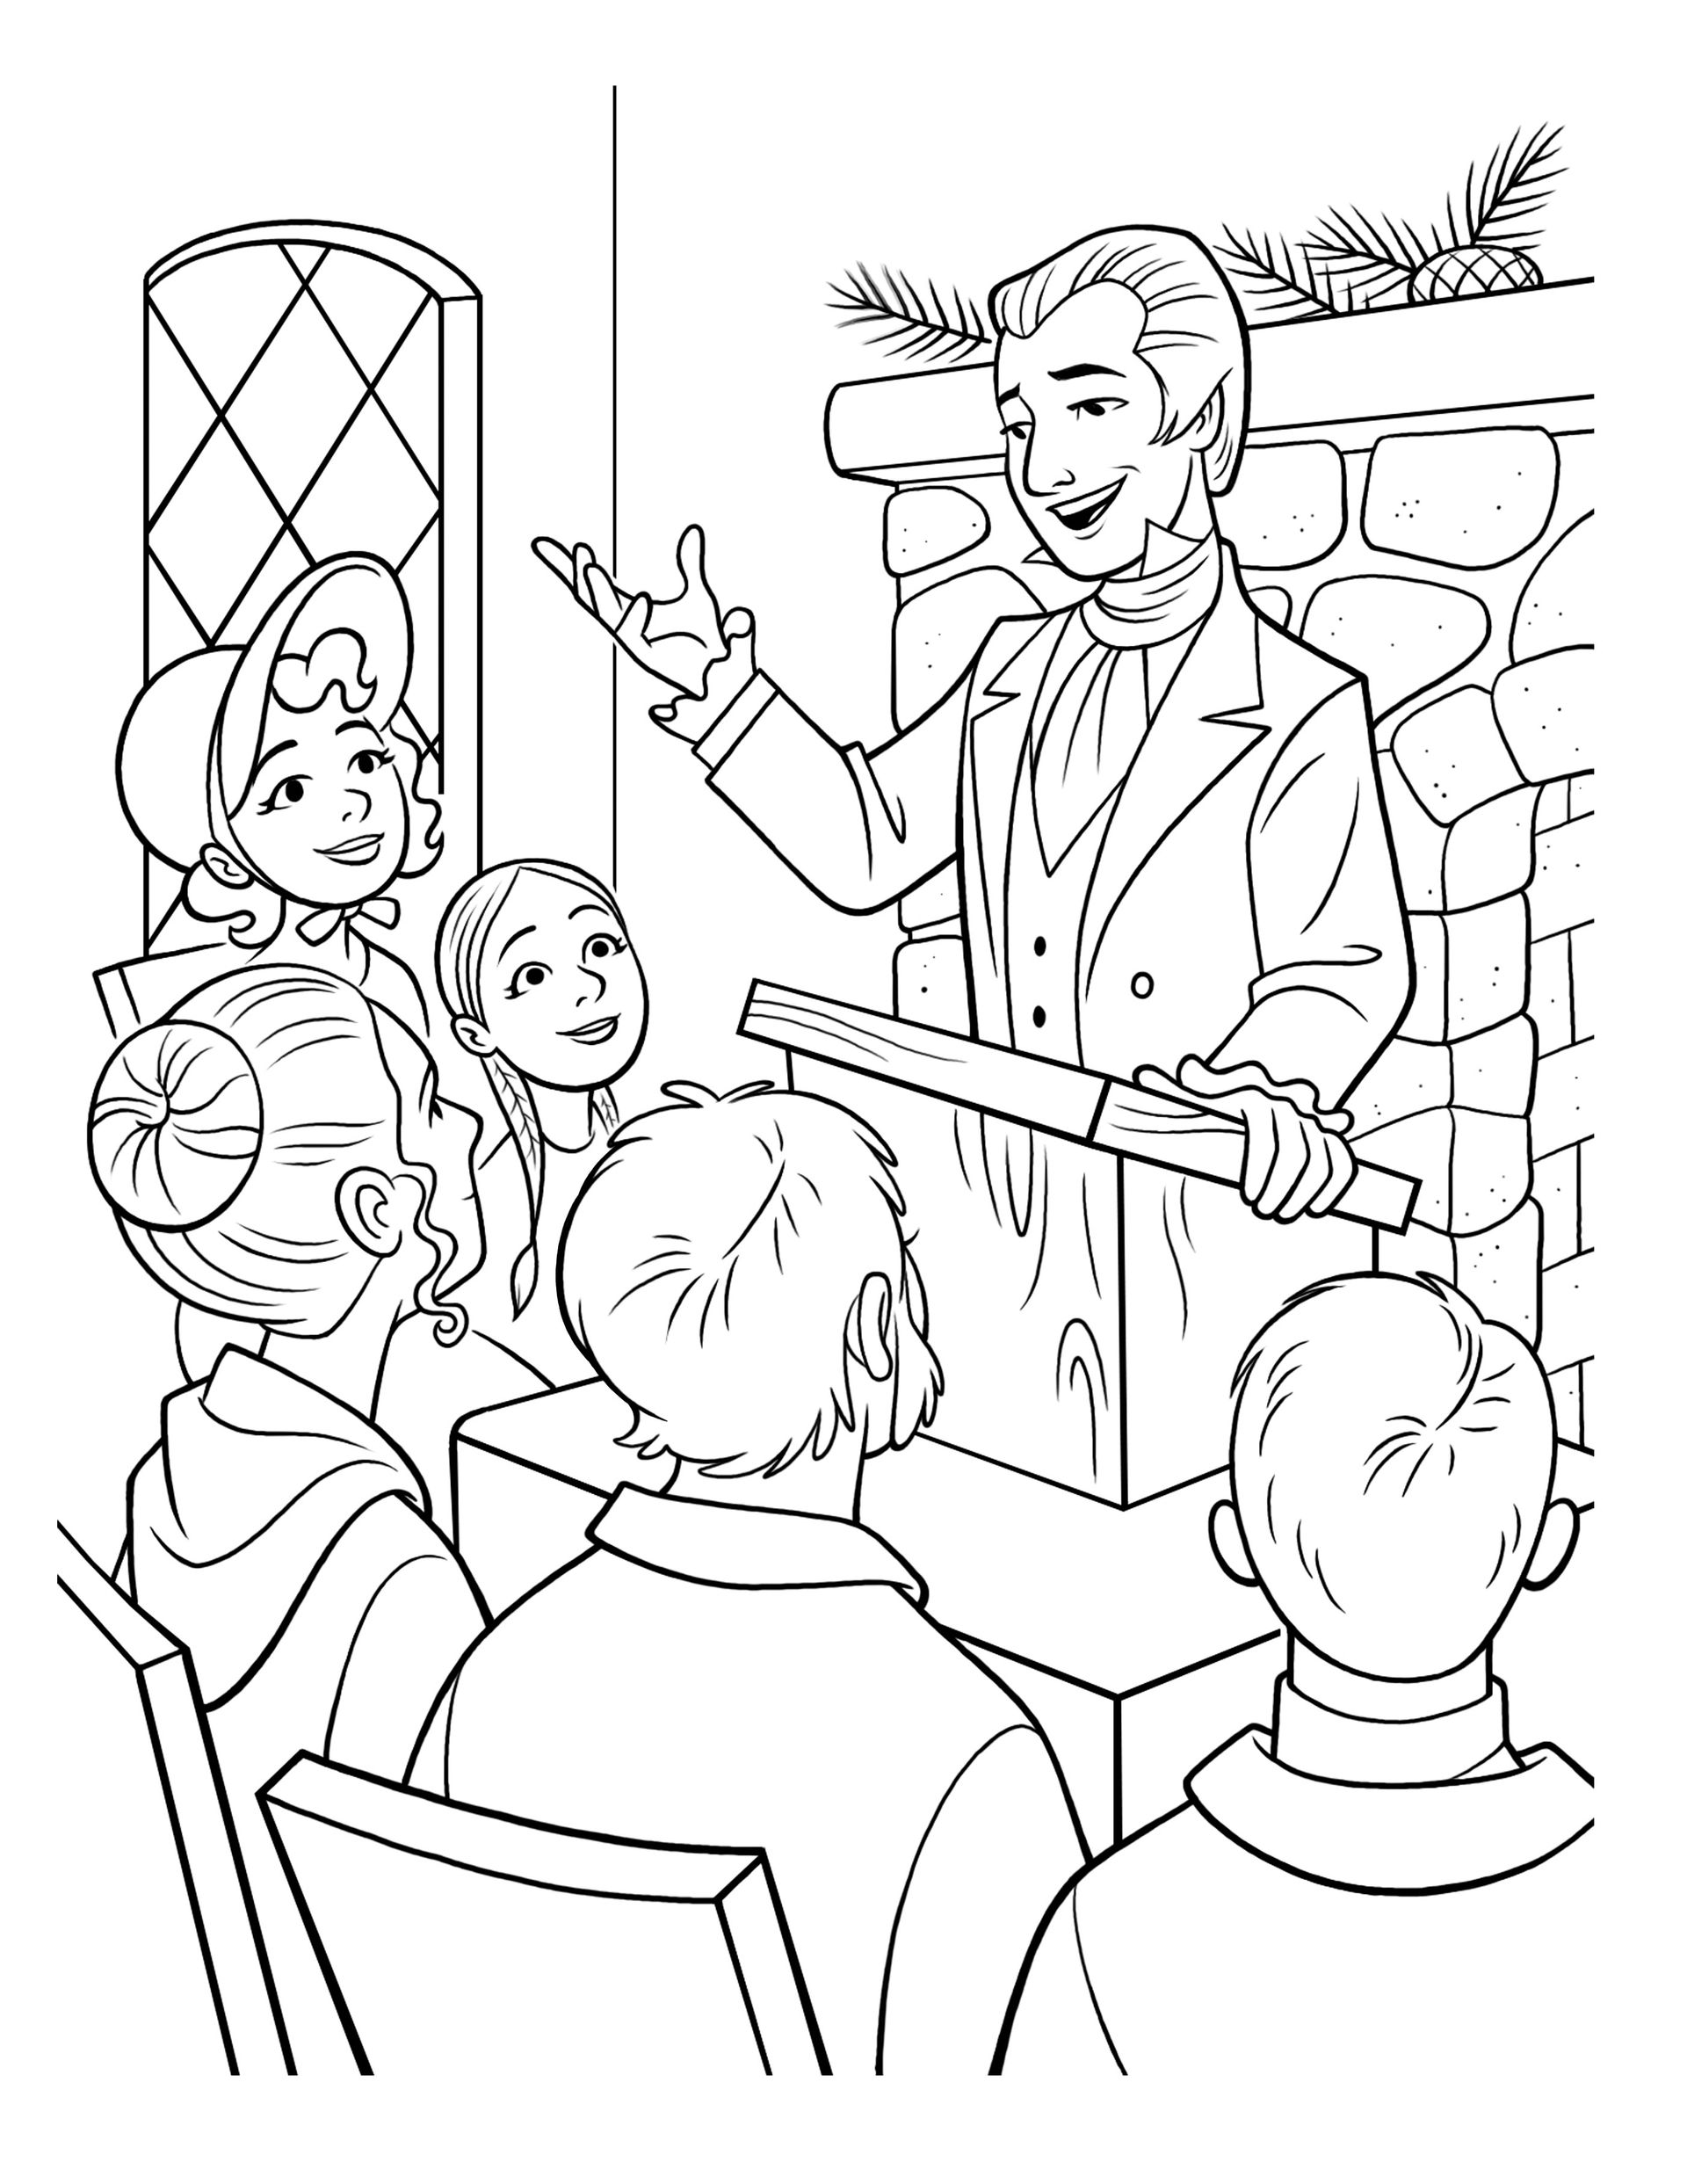 Joseph Smith preaches to a congregation from a pulpit.